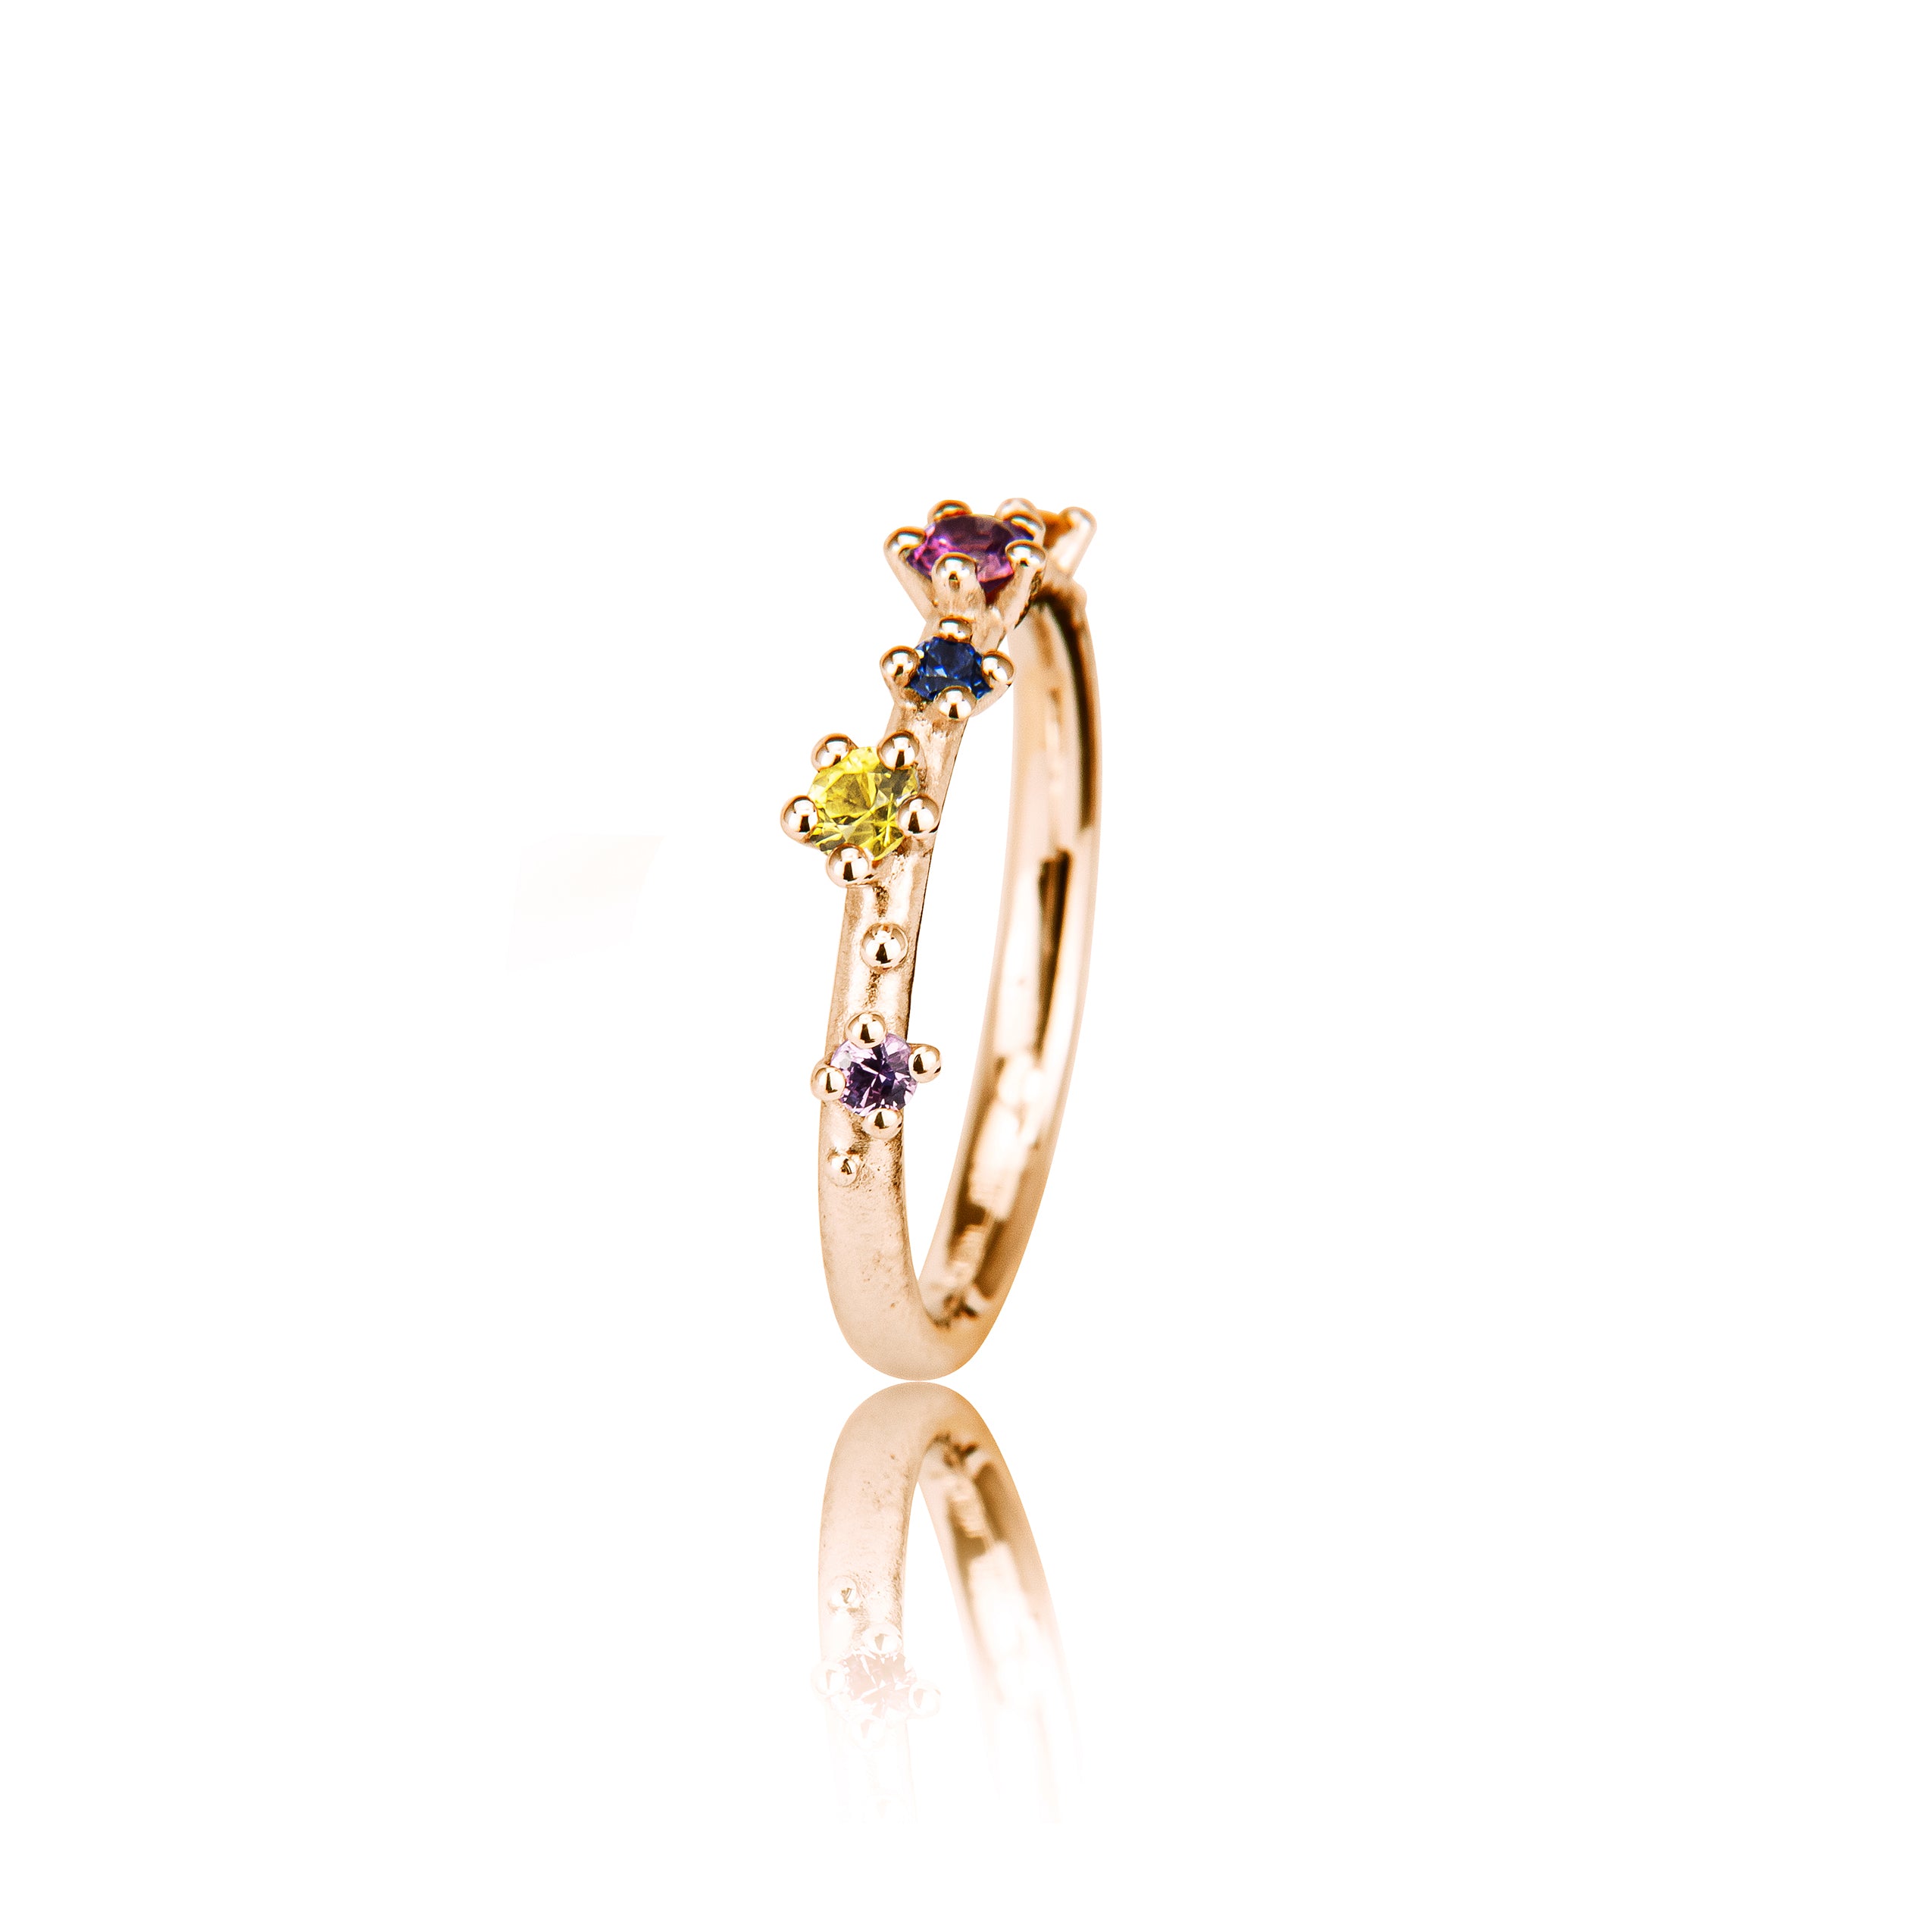 Shine ring "5" in gold with sapphires